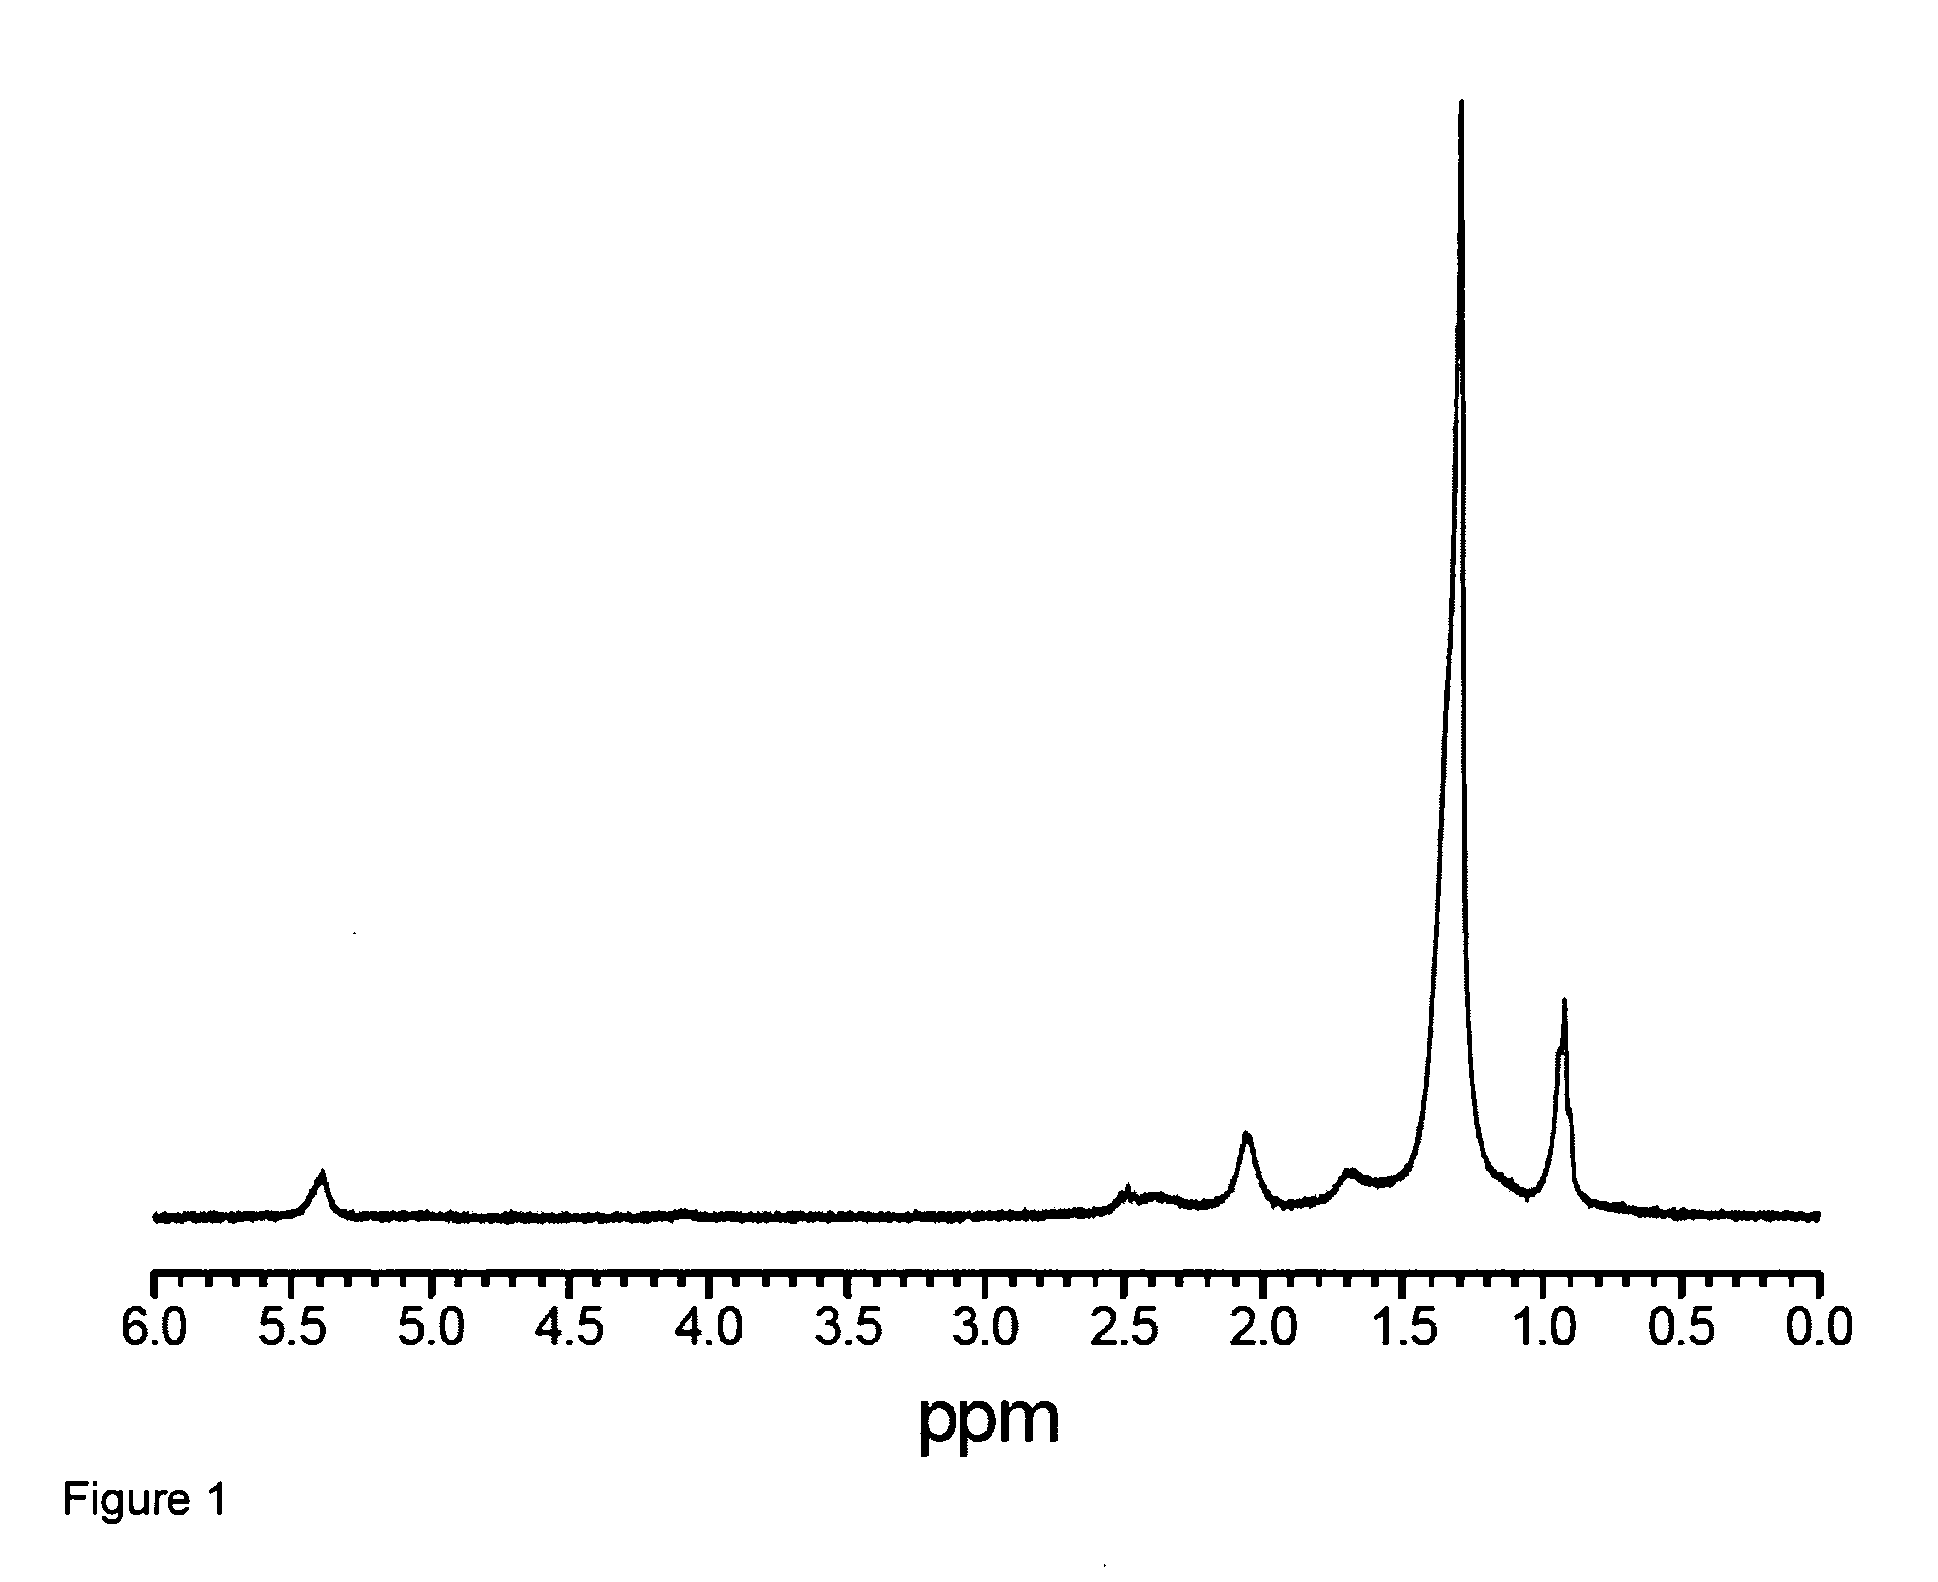 Lanthanide-doped nayf4 nanocrystals, method of preparing and uses thereof